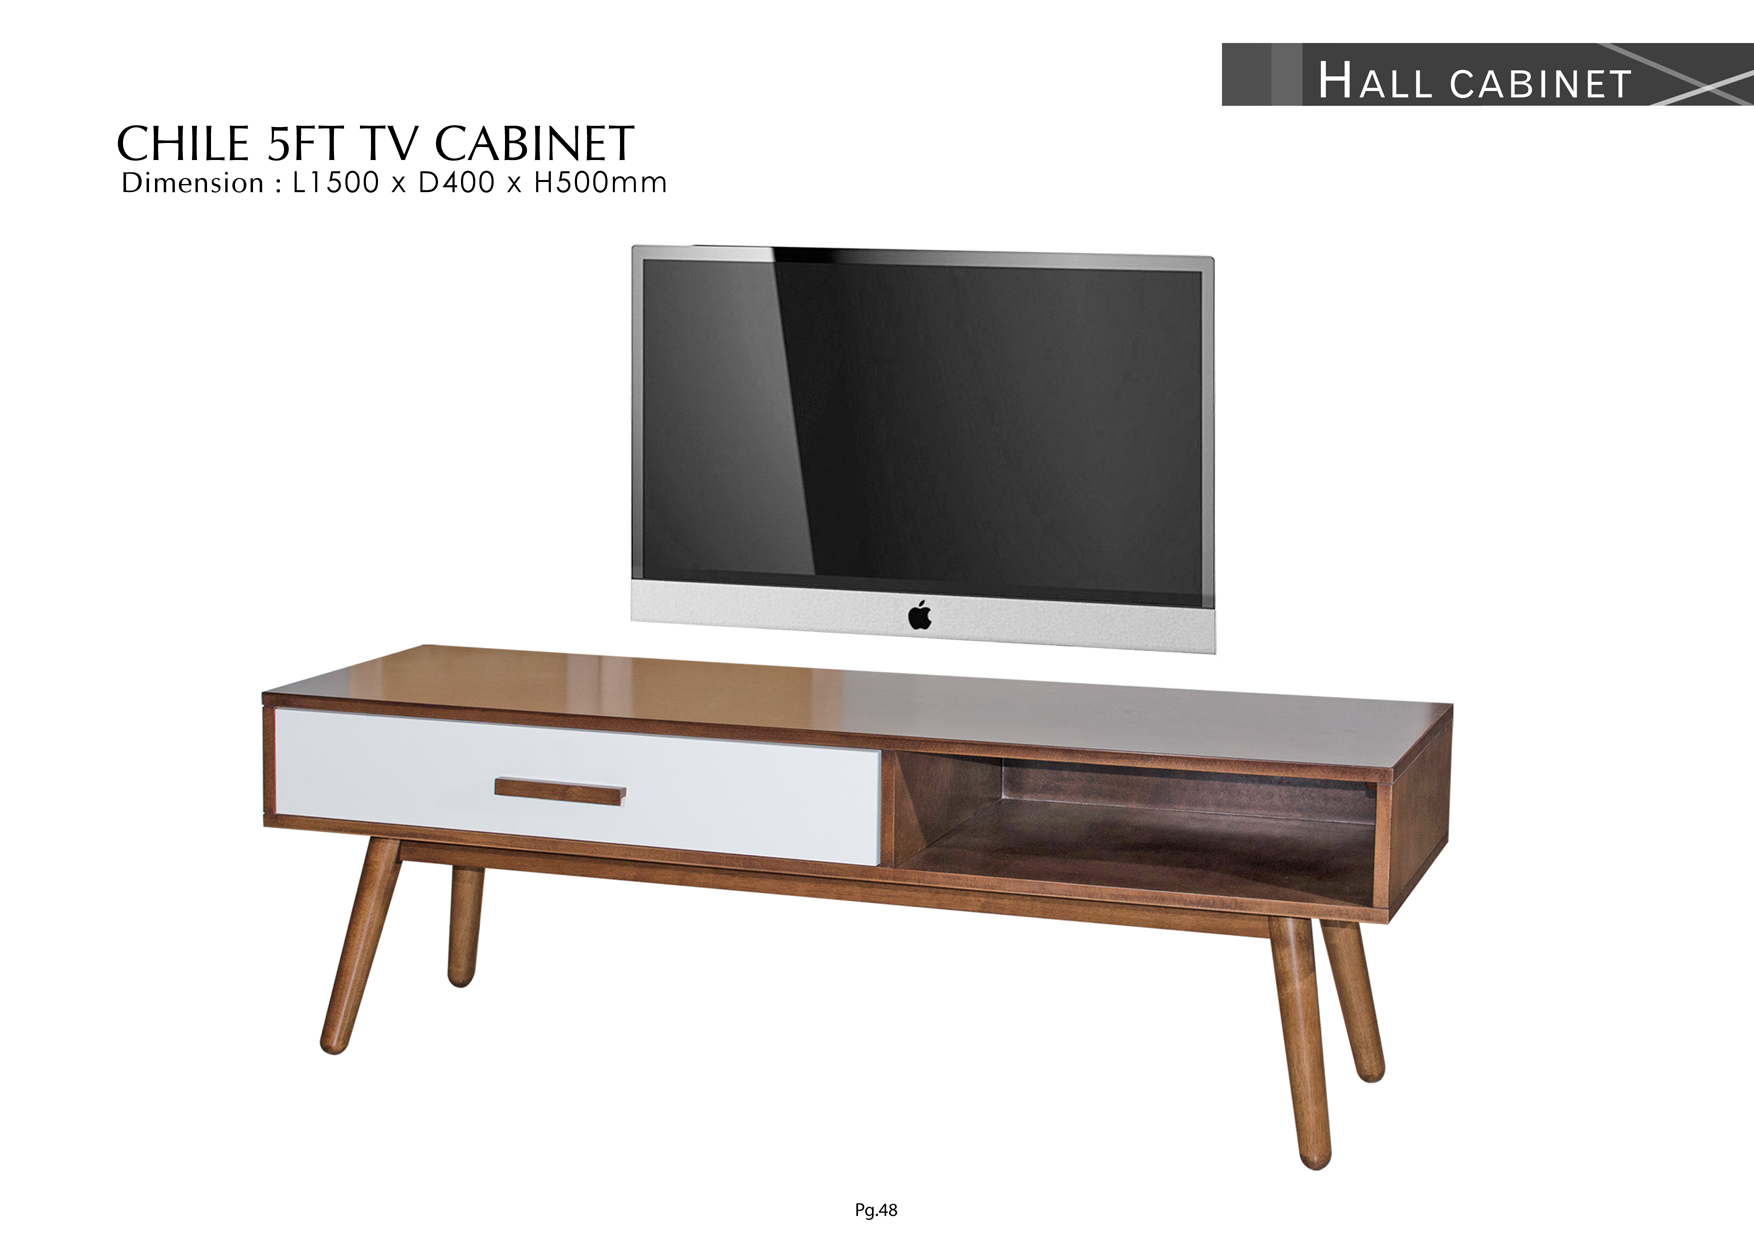 Product: PG48. CHILE 5FT TV CABINET